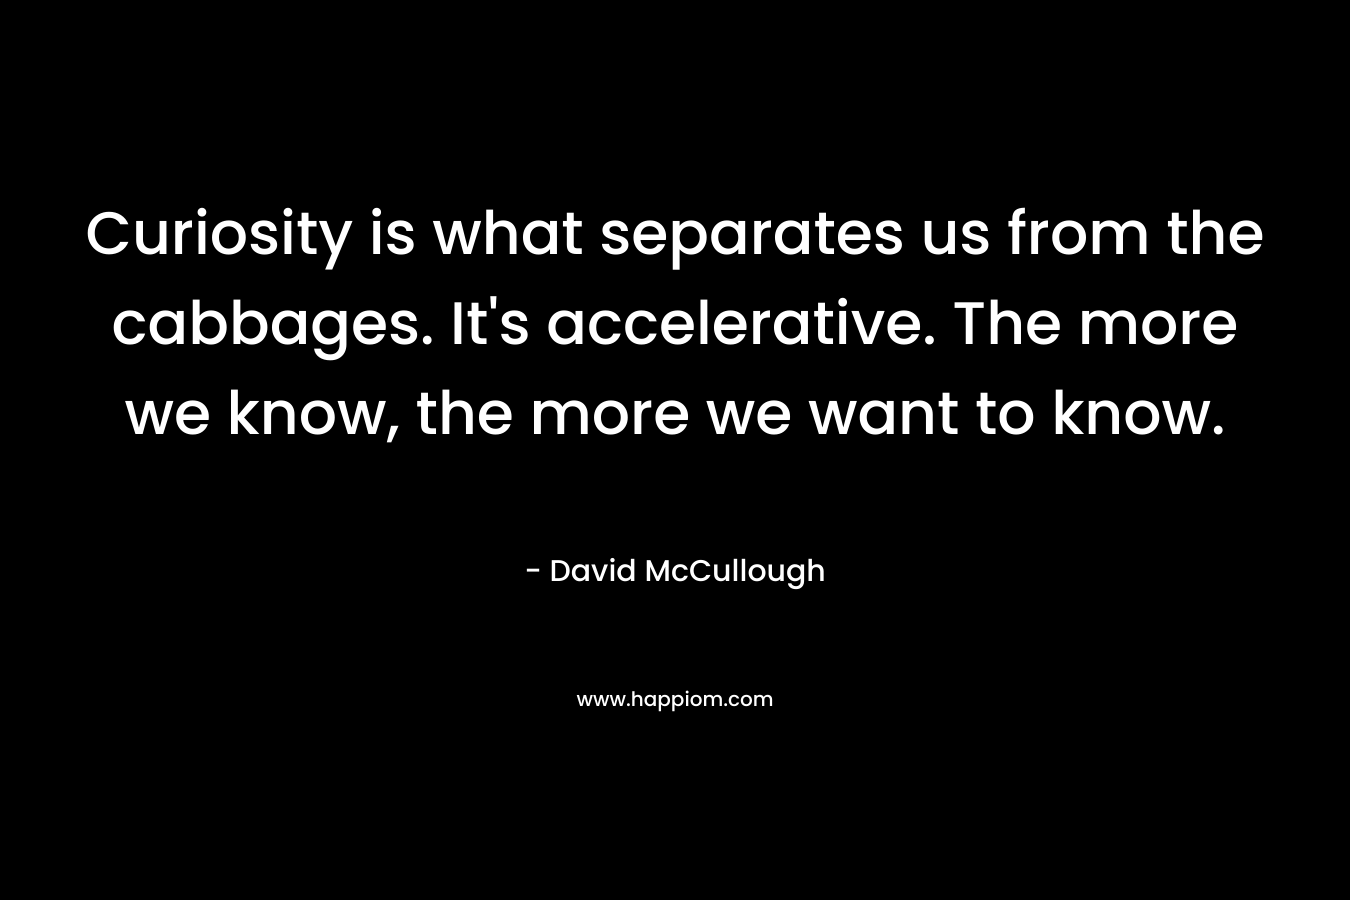 Curiosity is what separates us from the cabbages. It’s accelerative. The more we know, the more we want to know. – David McCullough